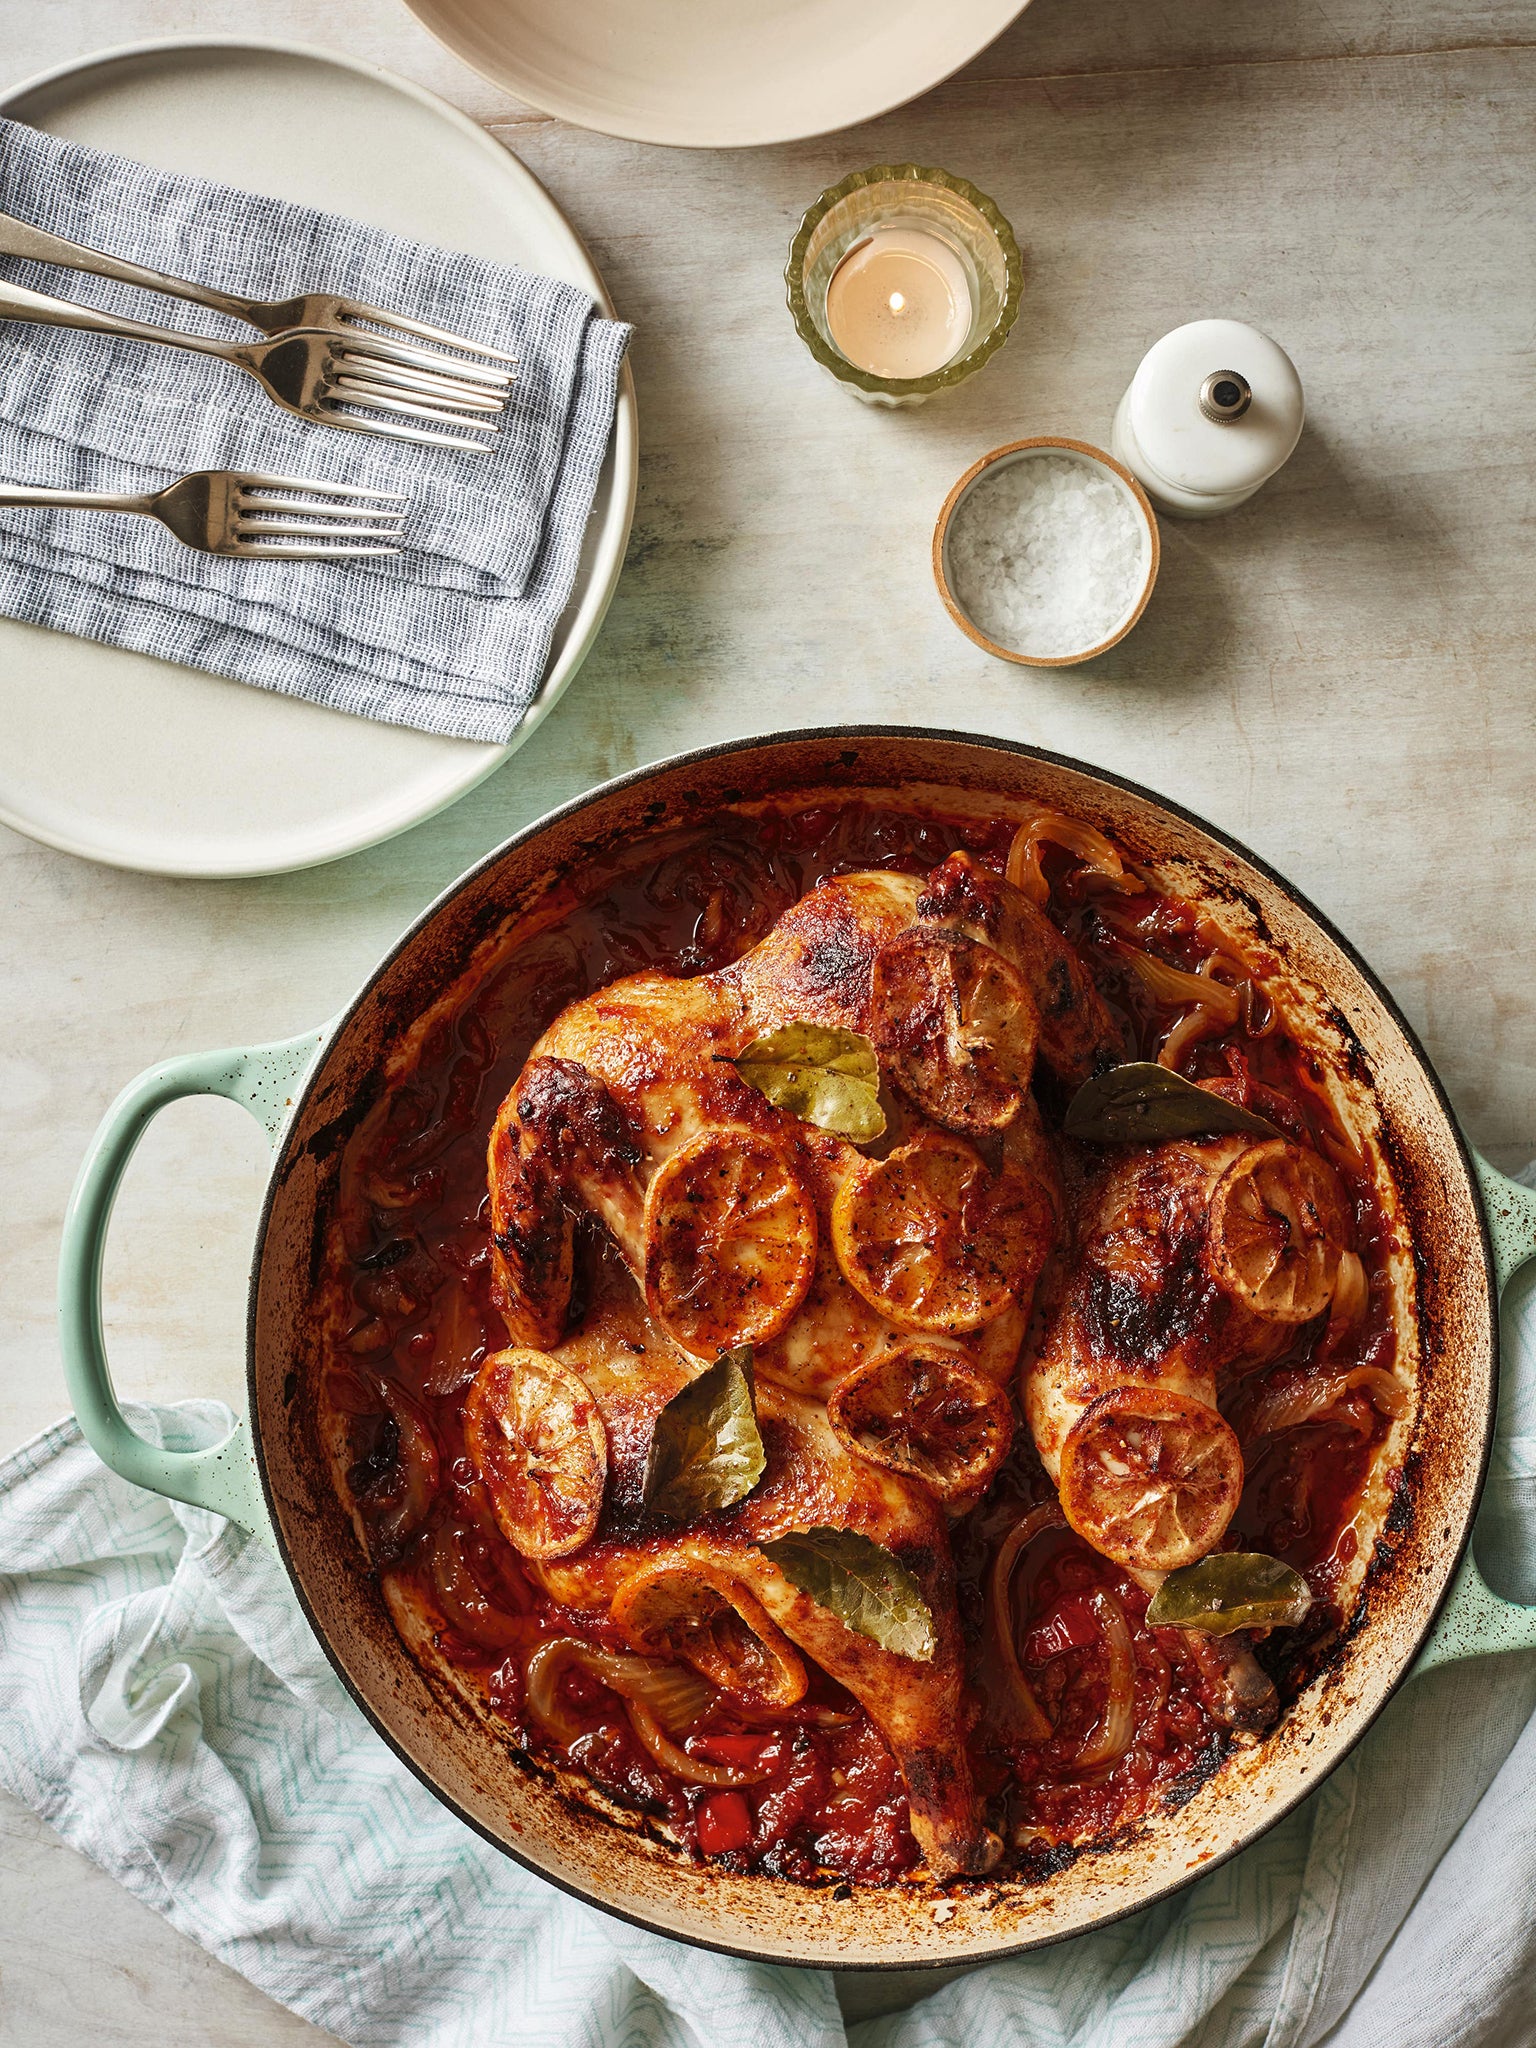 With rich tomato sauce and roasted vegetables, this makes for a warming winter supper